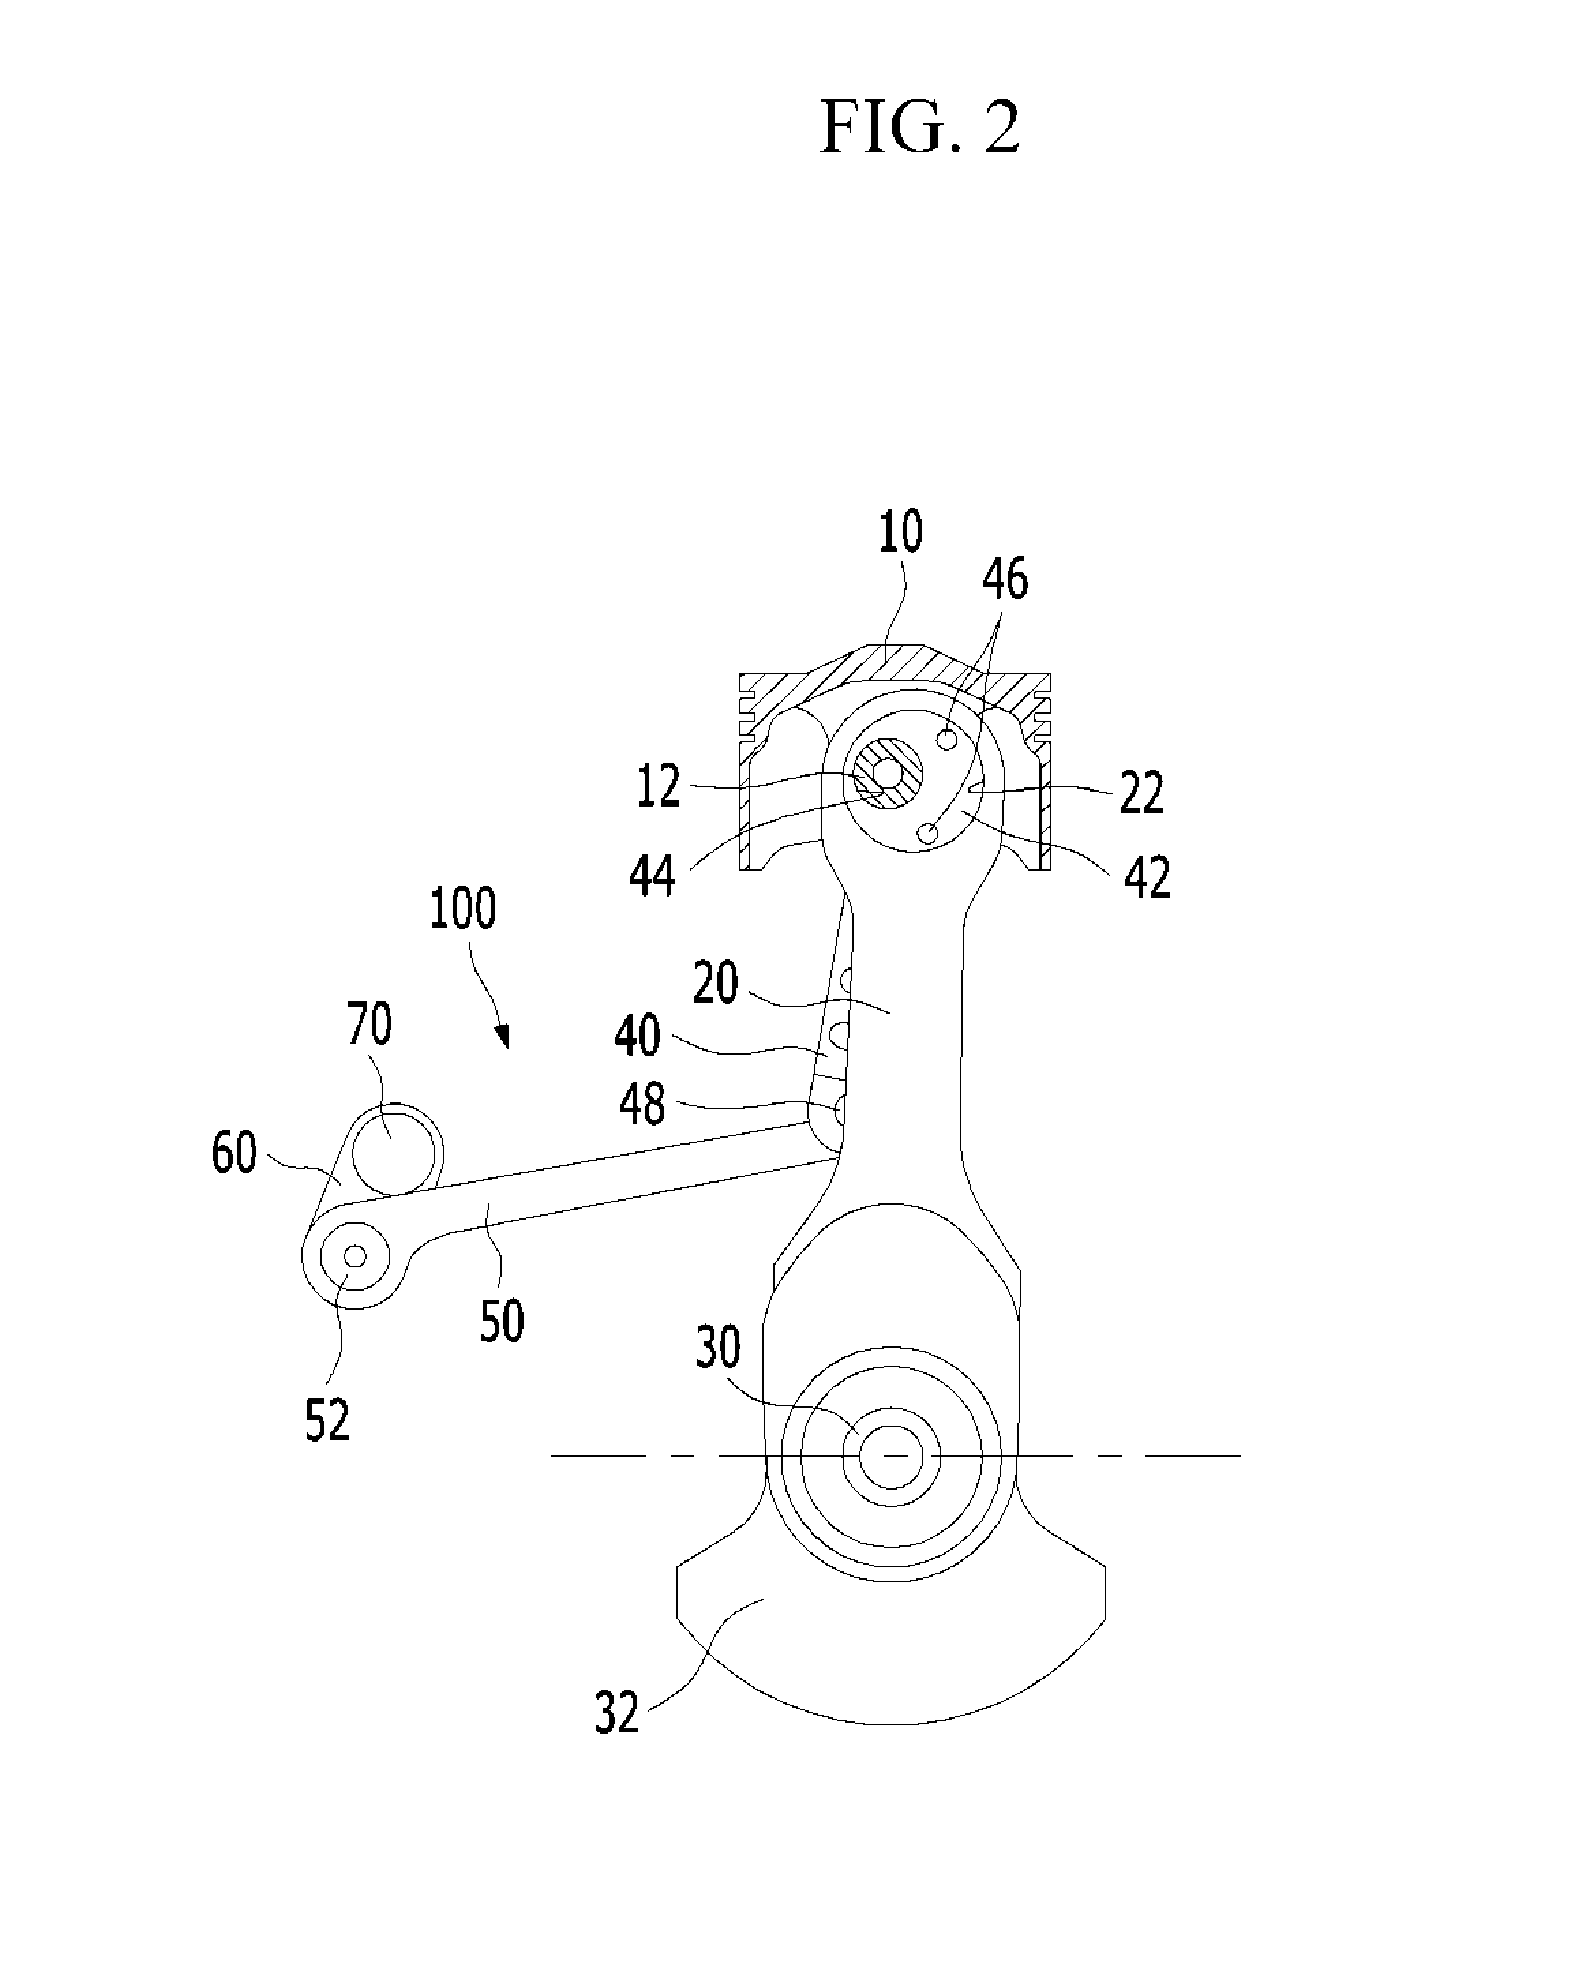 Variable compression ratio control system